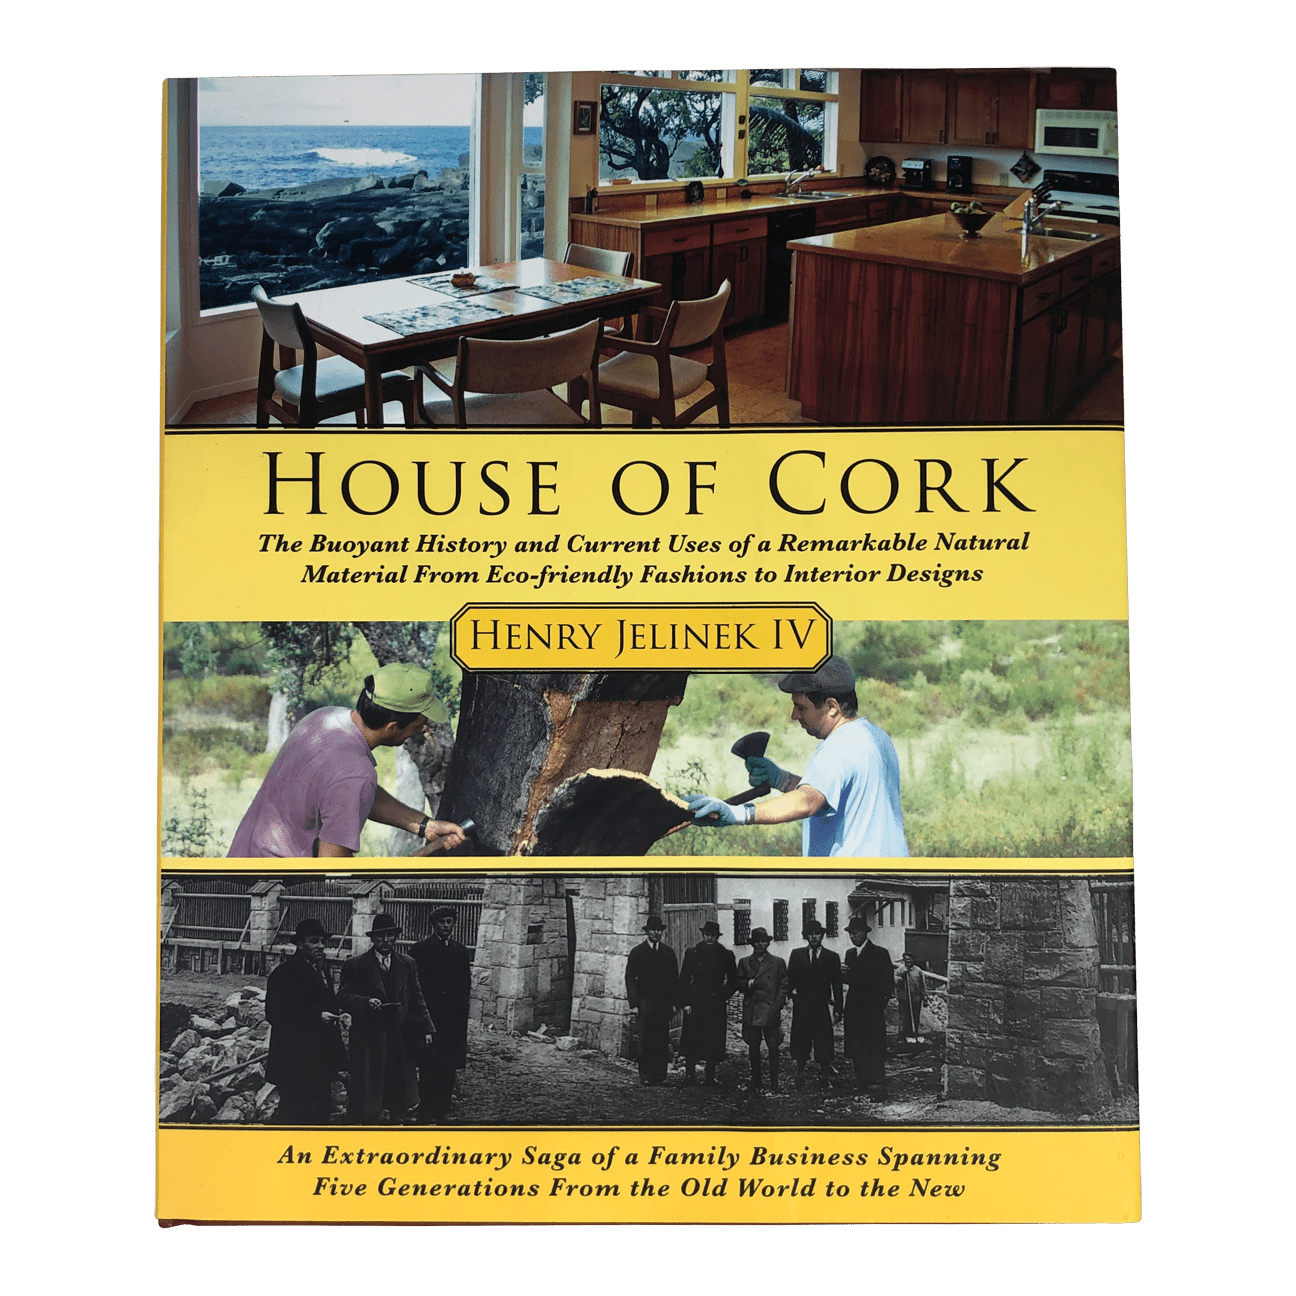 The front cover of "house of cork" book by Henry Jelinek showing photos of cork flooring, the cork harvest, and the Jelinek family. Written on the cover "House of Cork the buoyant history and current uses of a remarkable natural material from eco-friendly fashions to interior designs. An extraordinary saga of a family business spanning five generations from the old world to the new by Henry Jelinek IV."